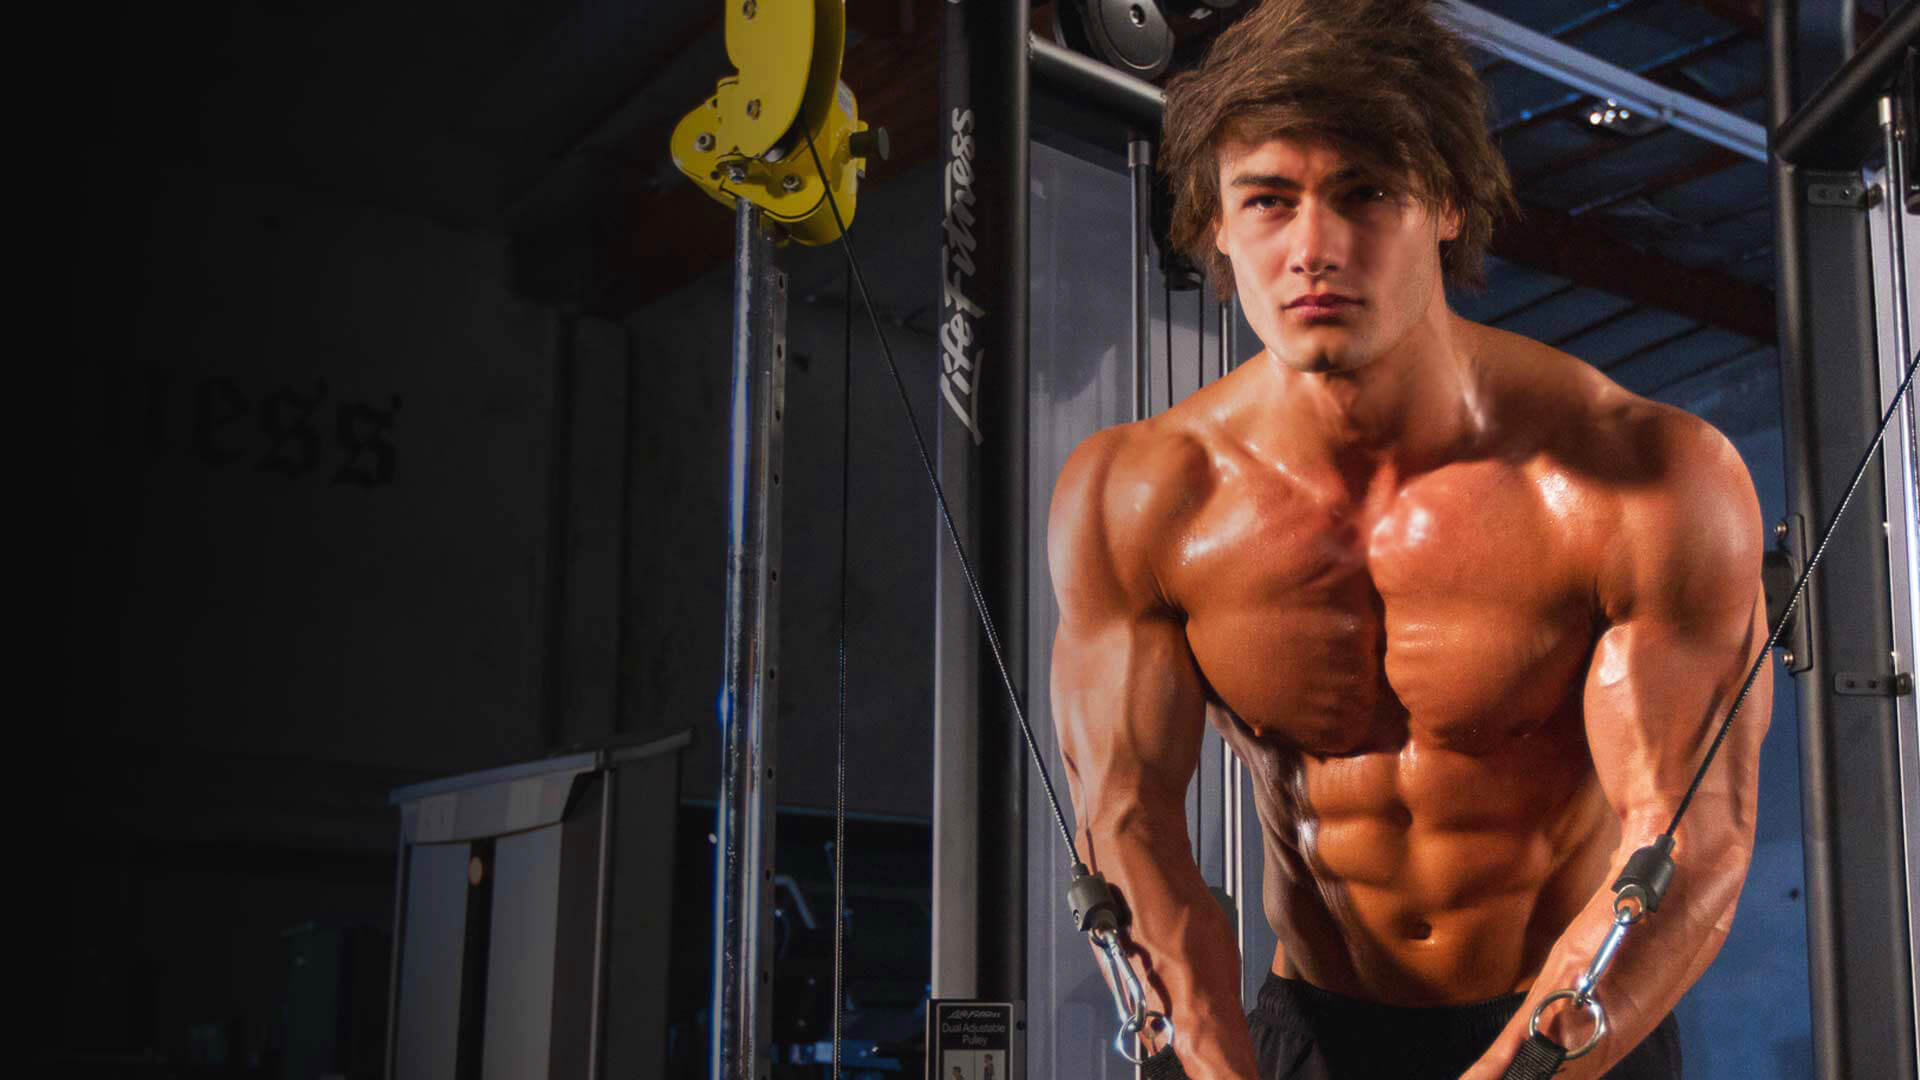 jeff seid hd wallpapers,bodybuilder,barechested,bodybuilding,muscle,physical fitness